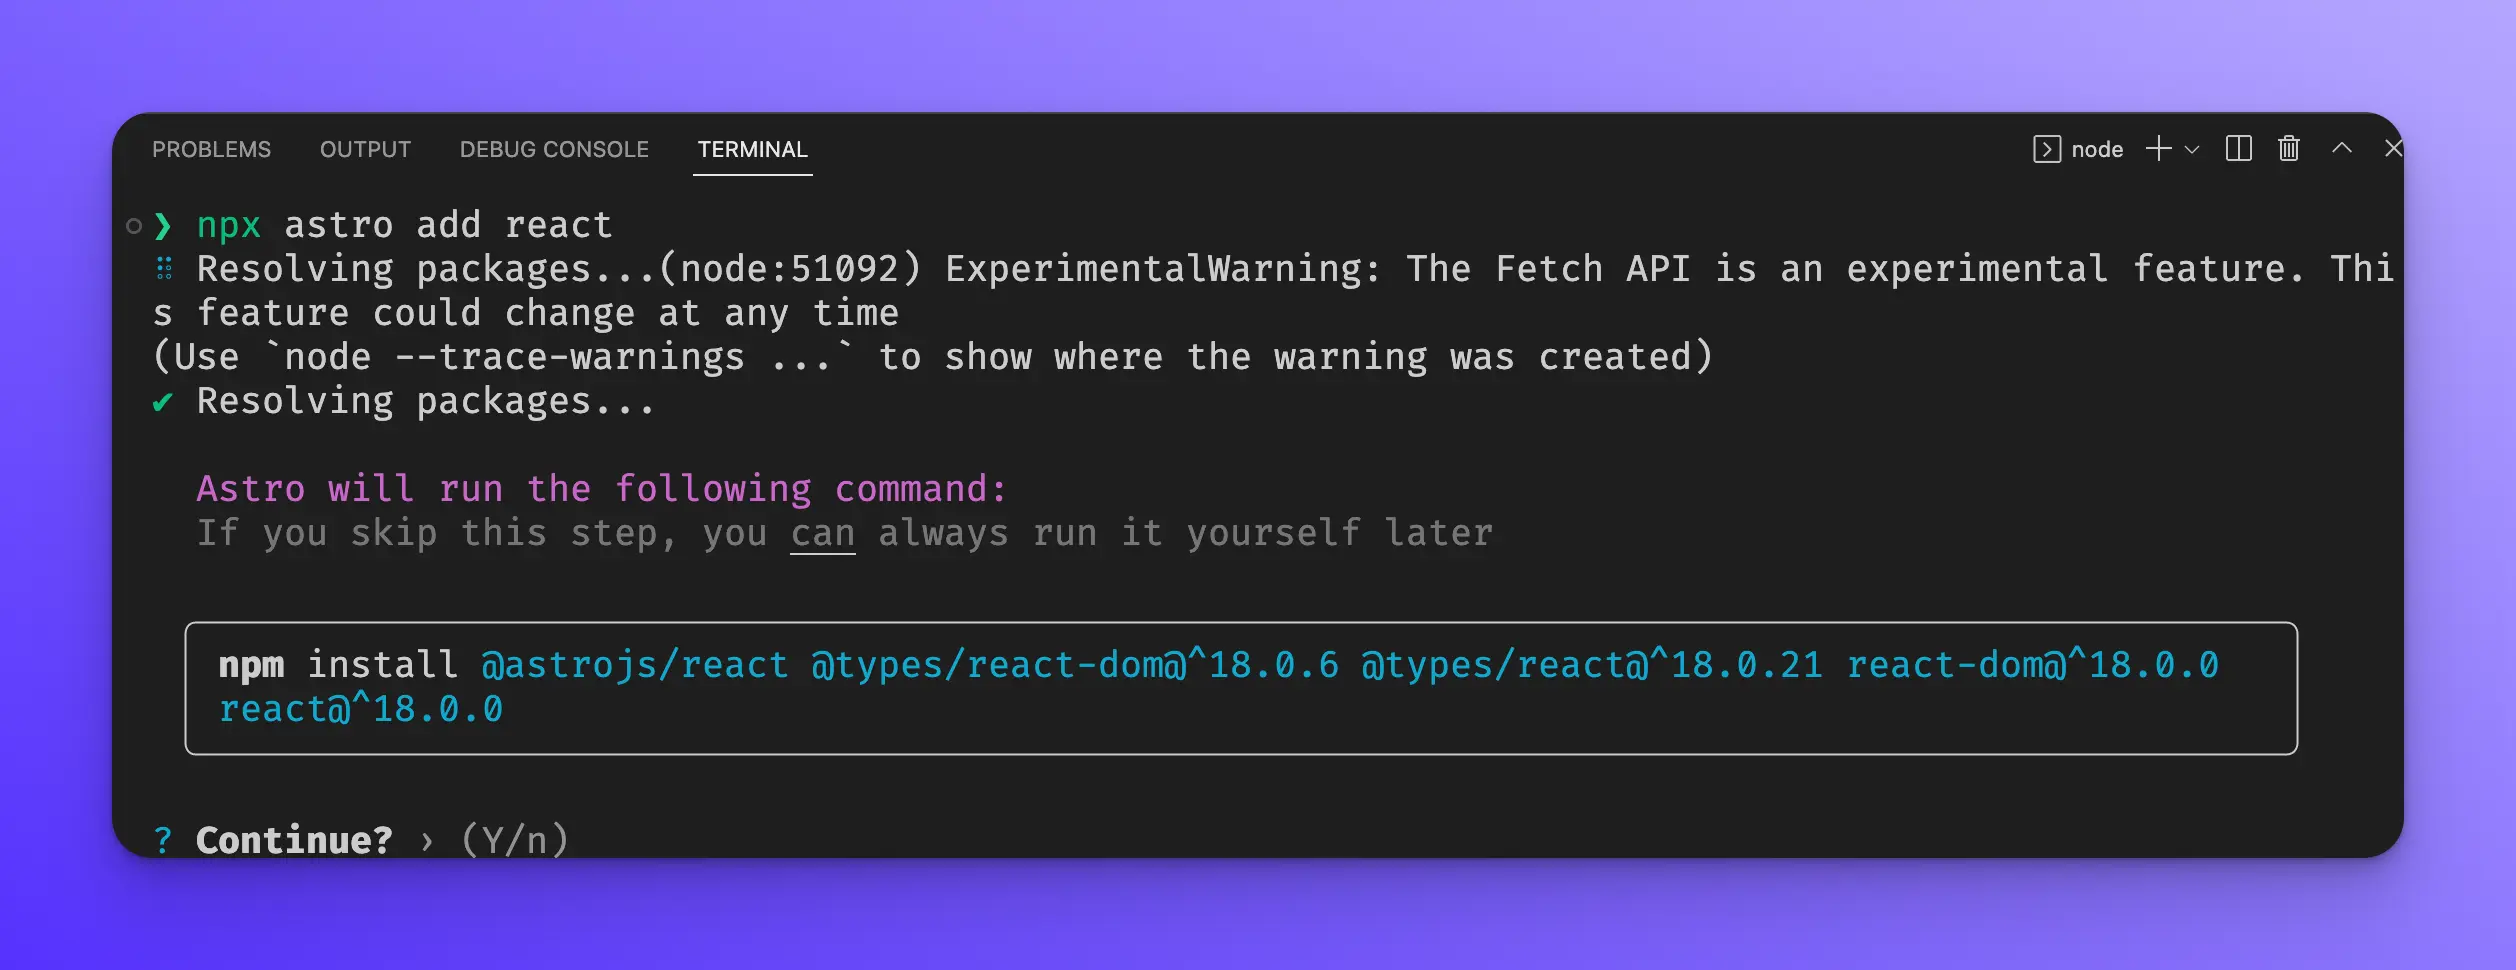 npx-astro-add-react.png